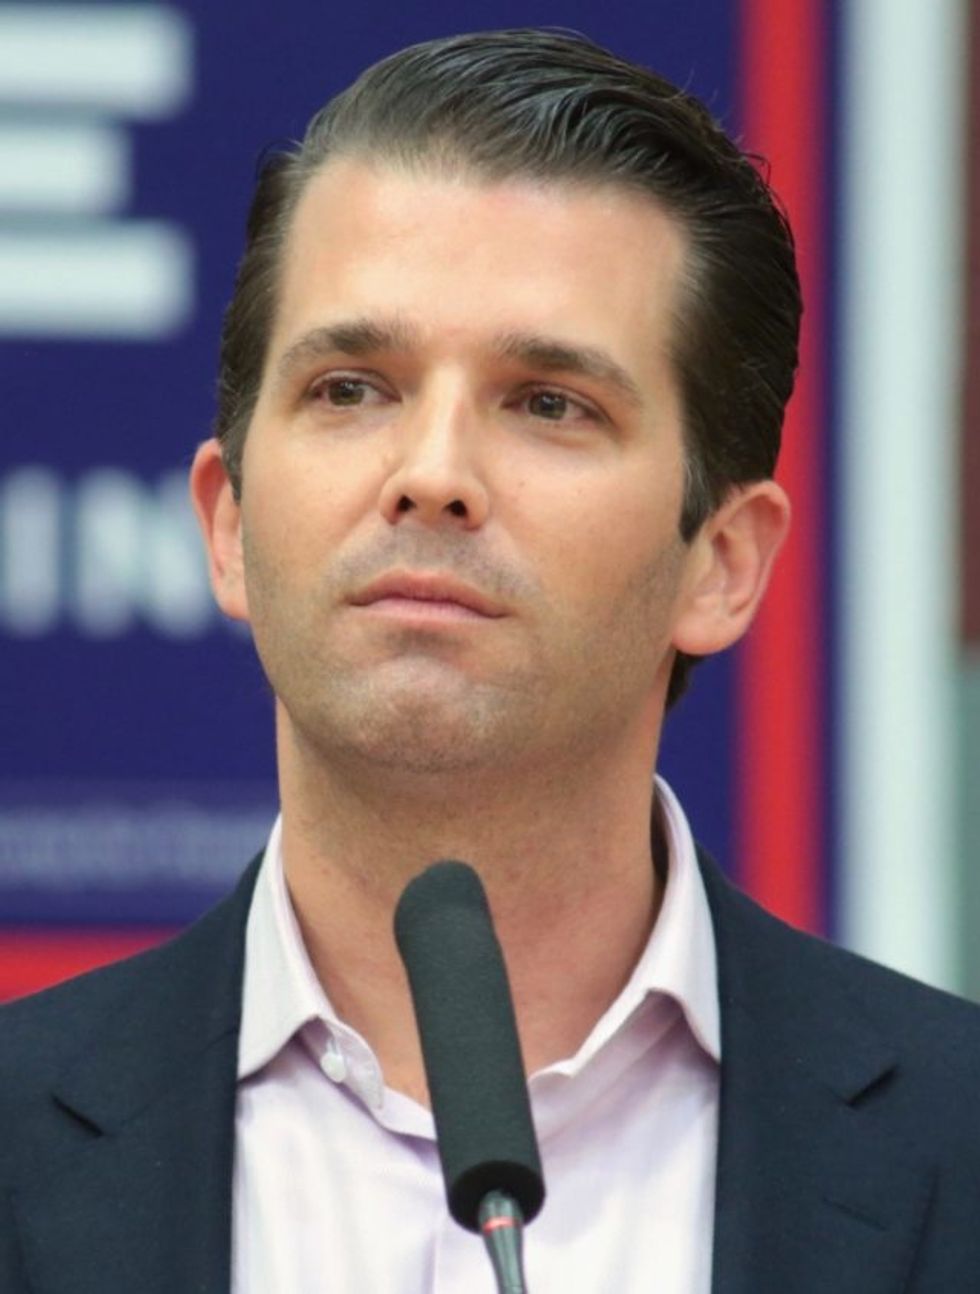 Trump, Inc: Don Jr. Pushed ‘Blatantly Illegal’ Project In India